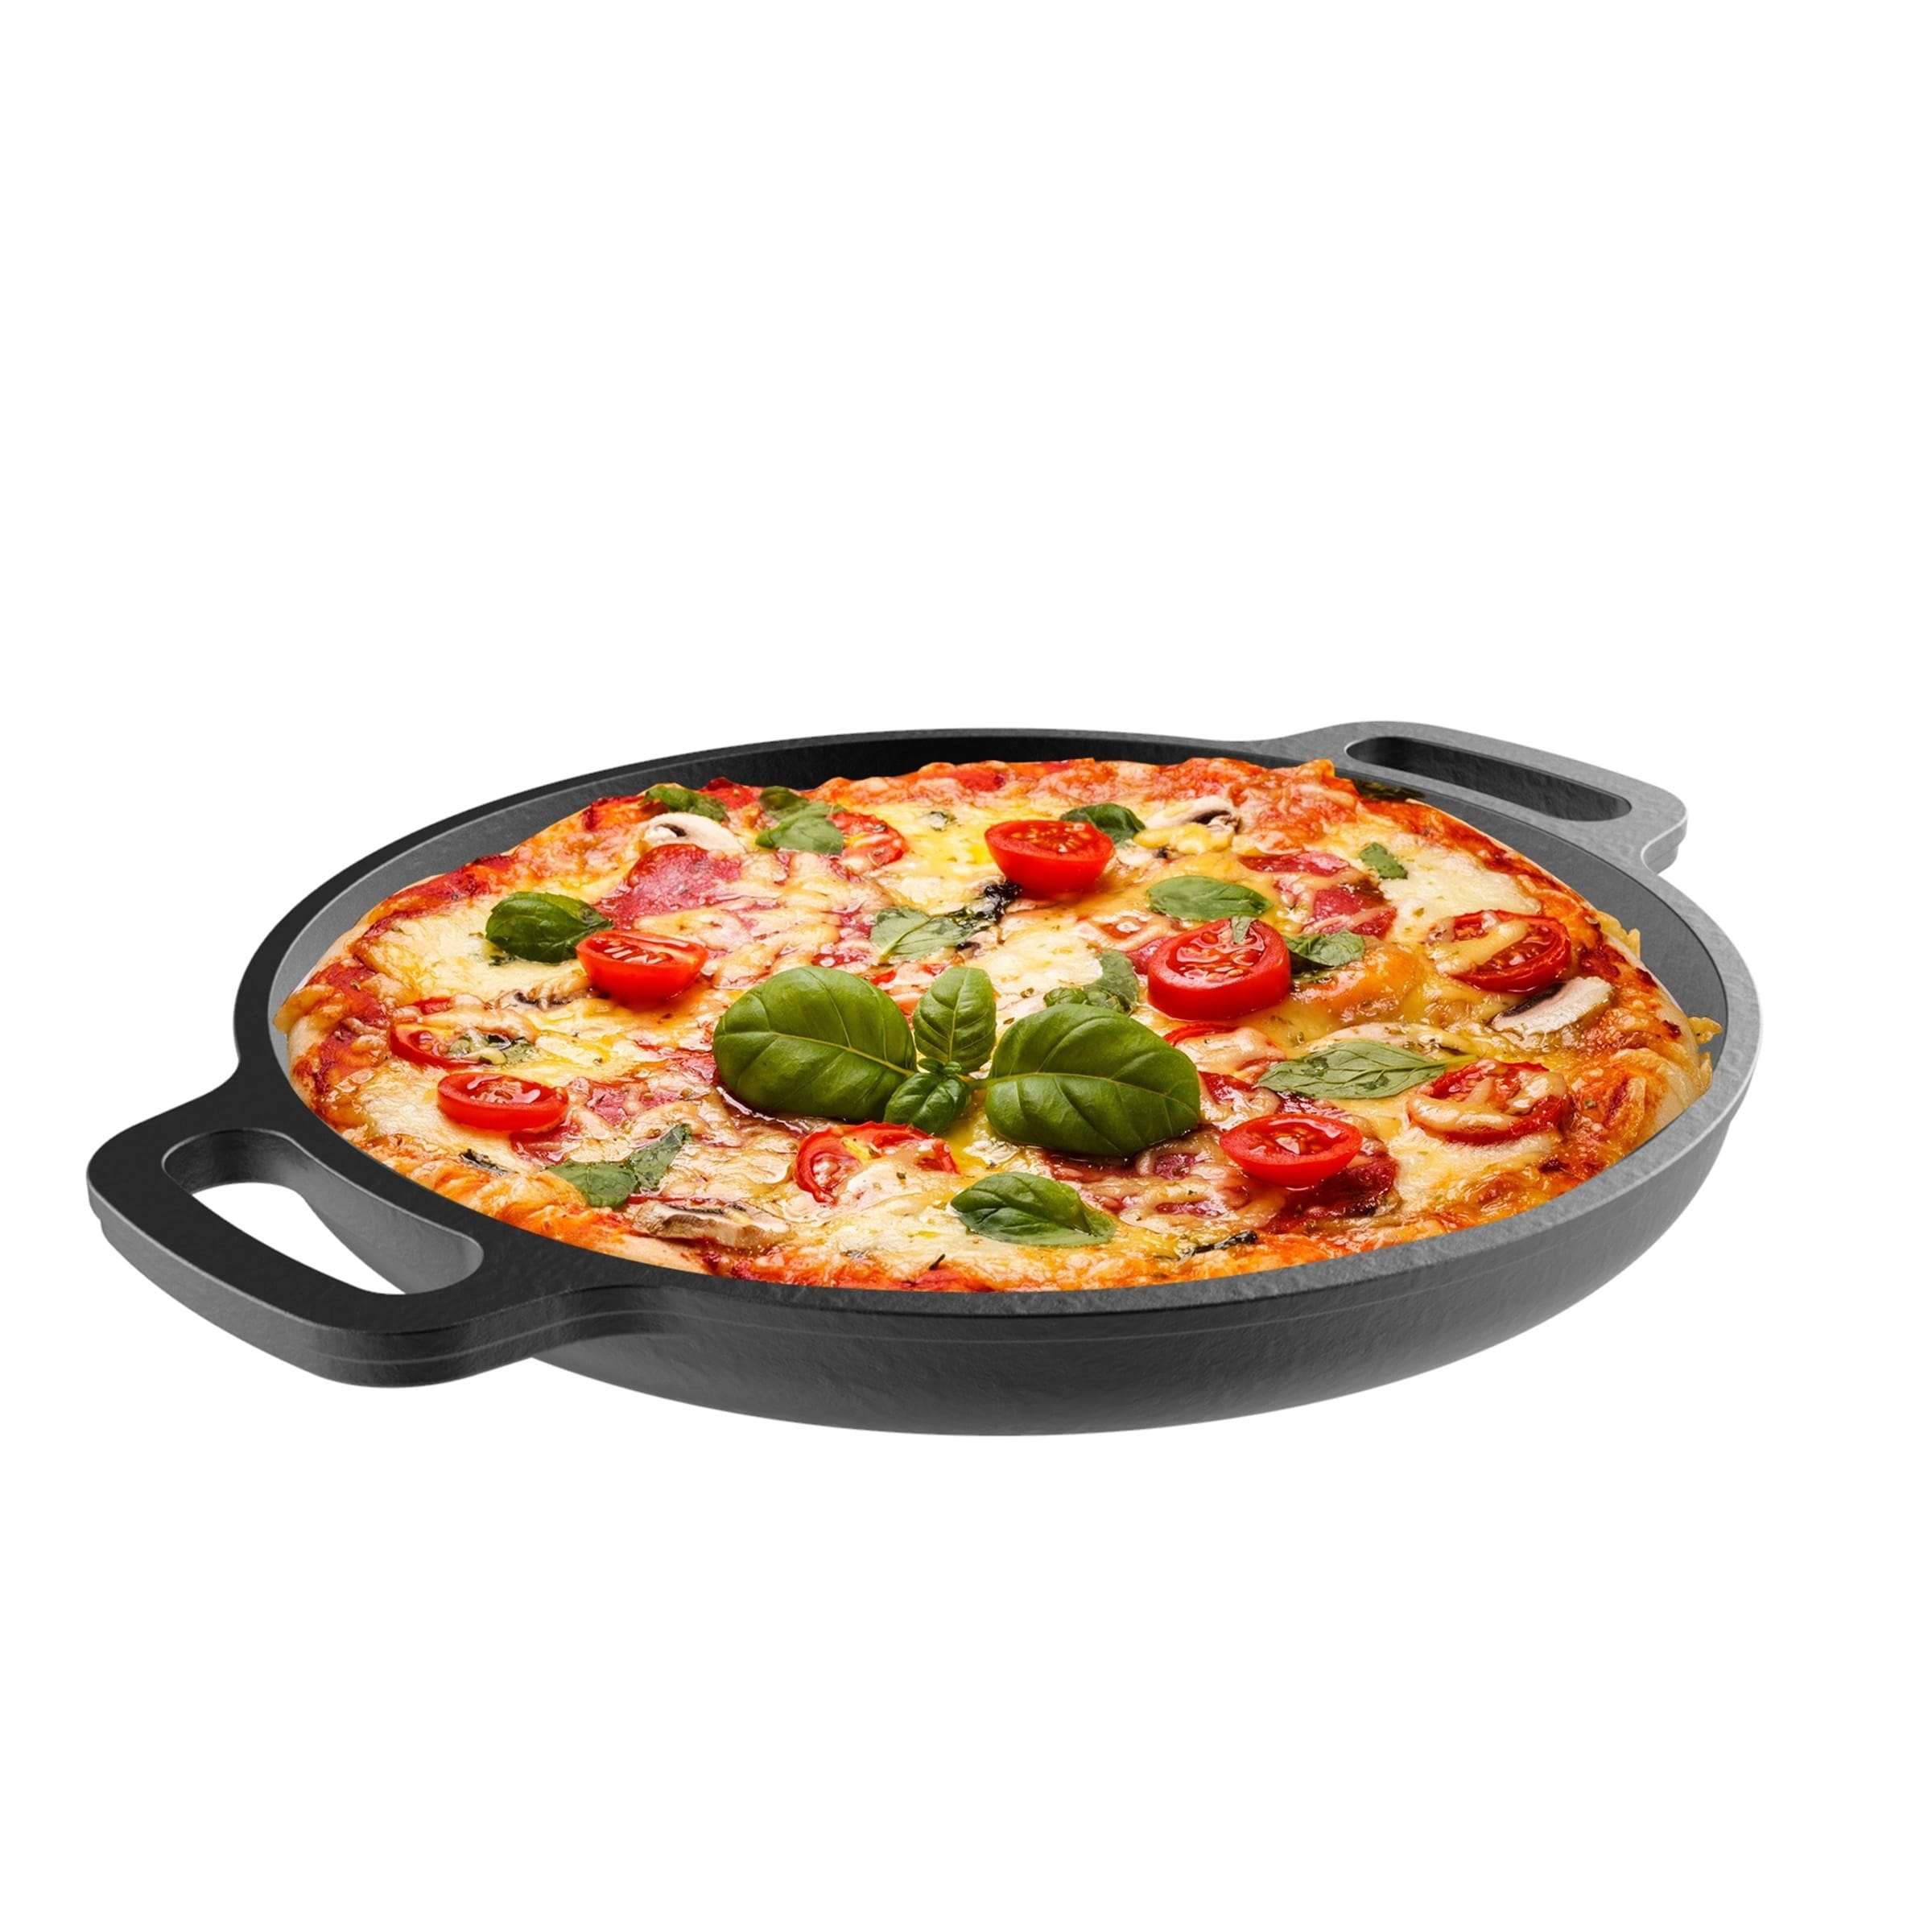 Cast Iron Pizza Pan-13.25 Inches Pre-Seasoned Skillet for Cooking, Baking,  Grilling-Durable, Long Lasting by Classic Cuisine - Bed Bath & Beyond -  22897374